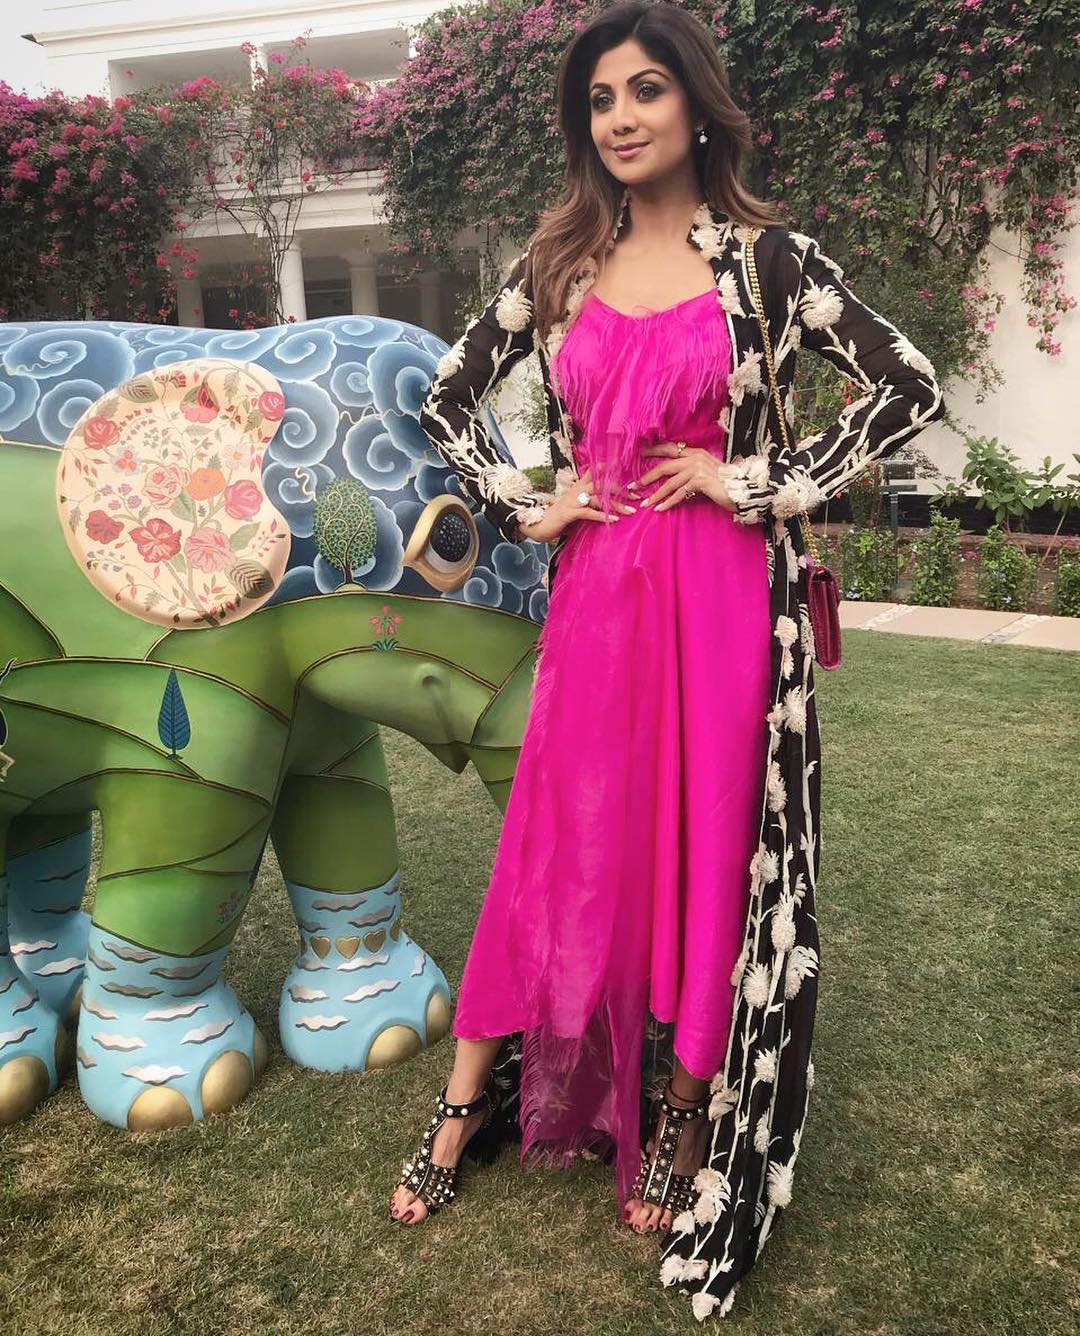 Shilpa Shetty Looked Amazing In A Pink Dress By Anamika Khanna